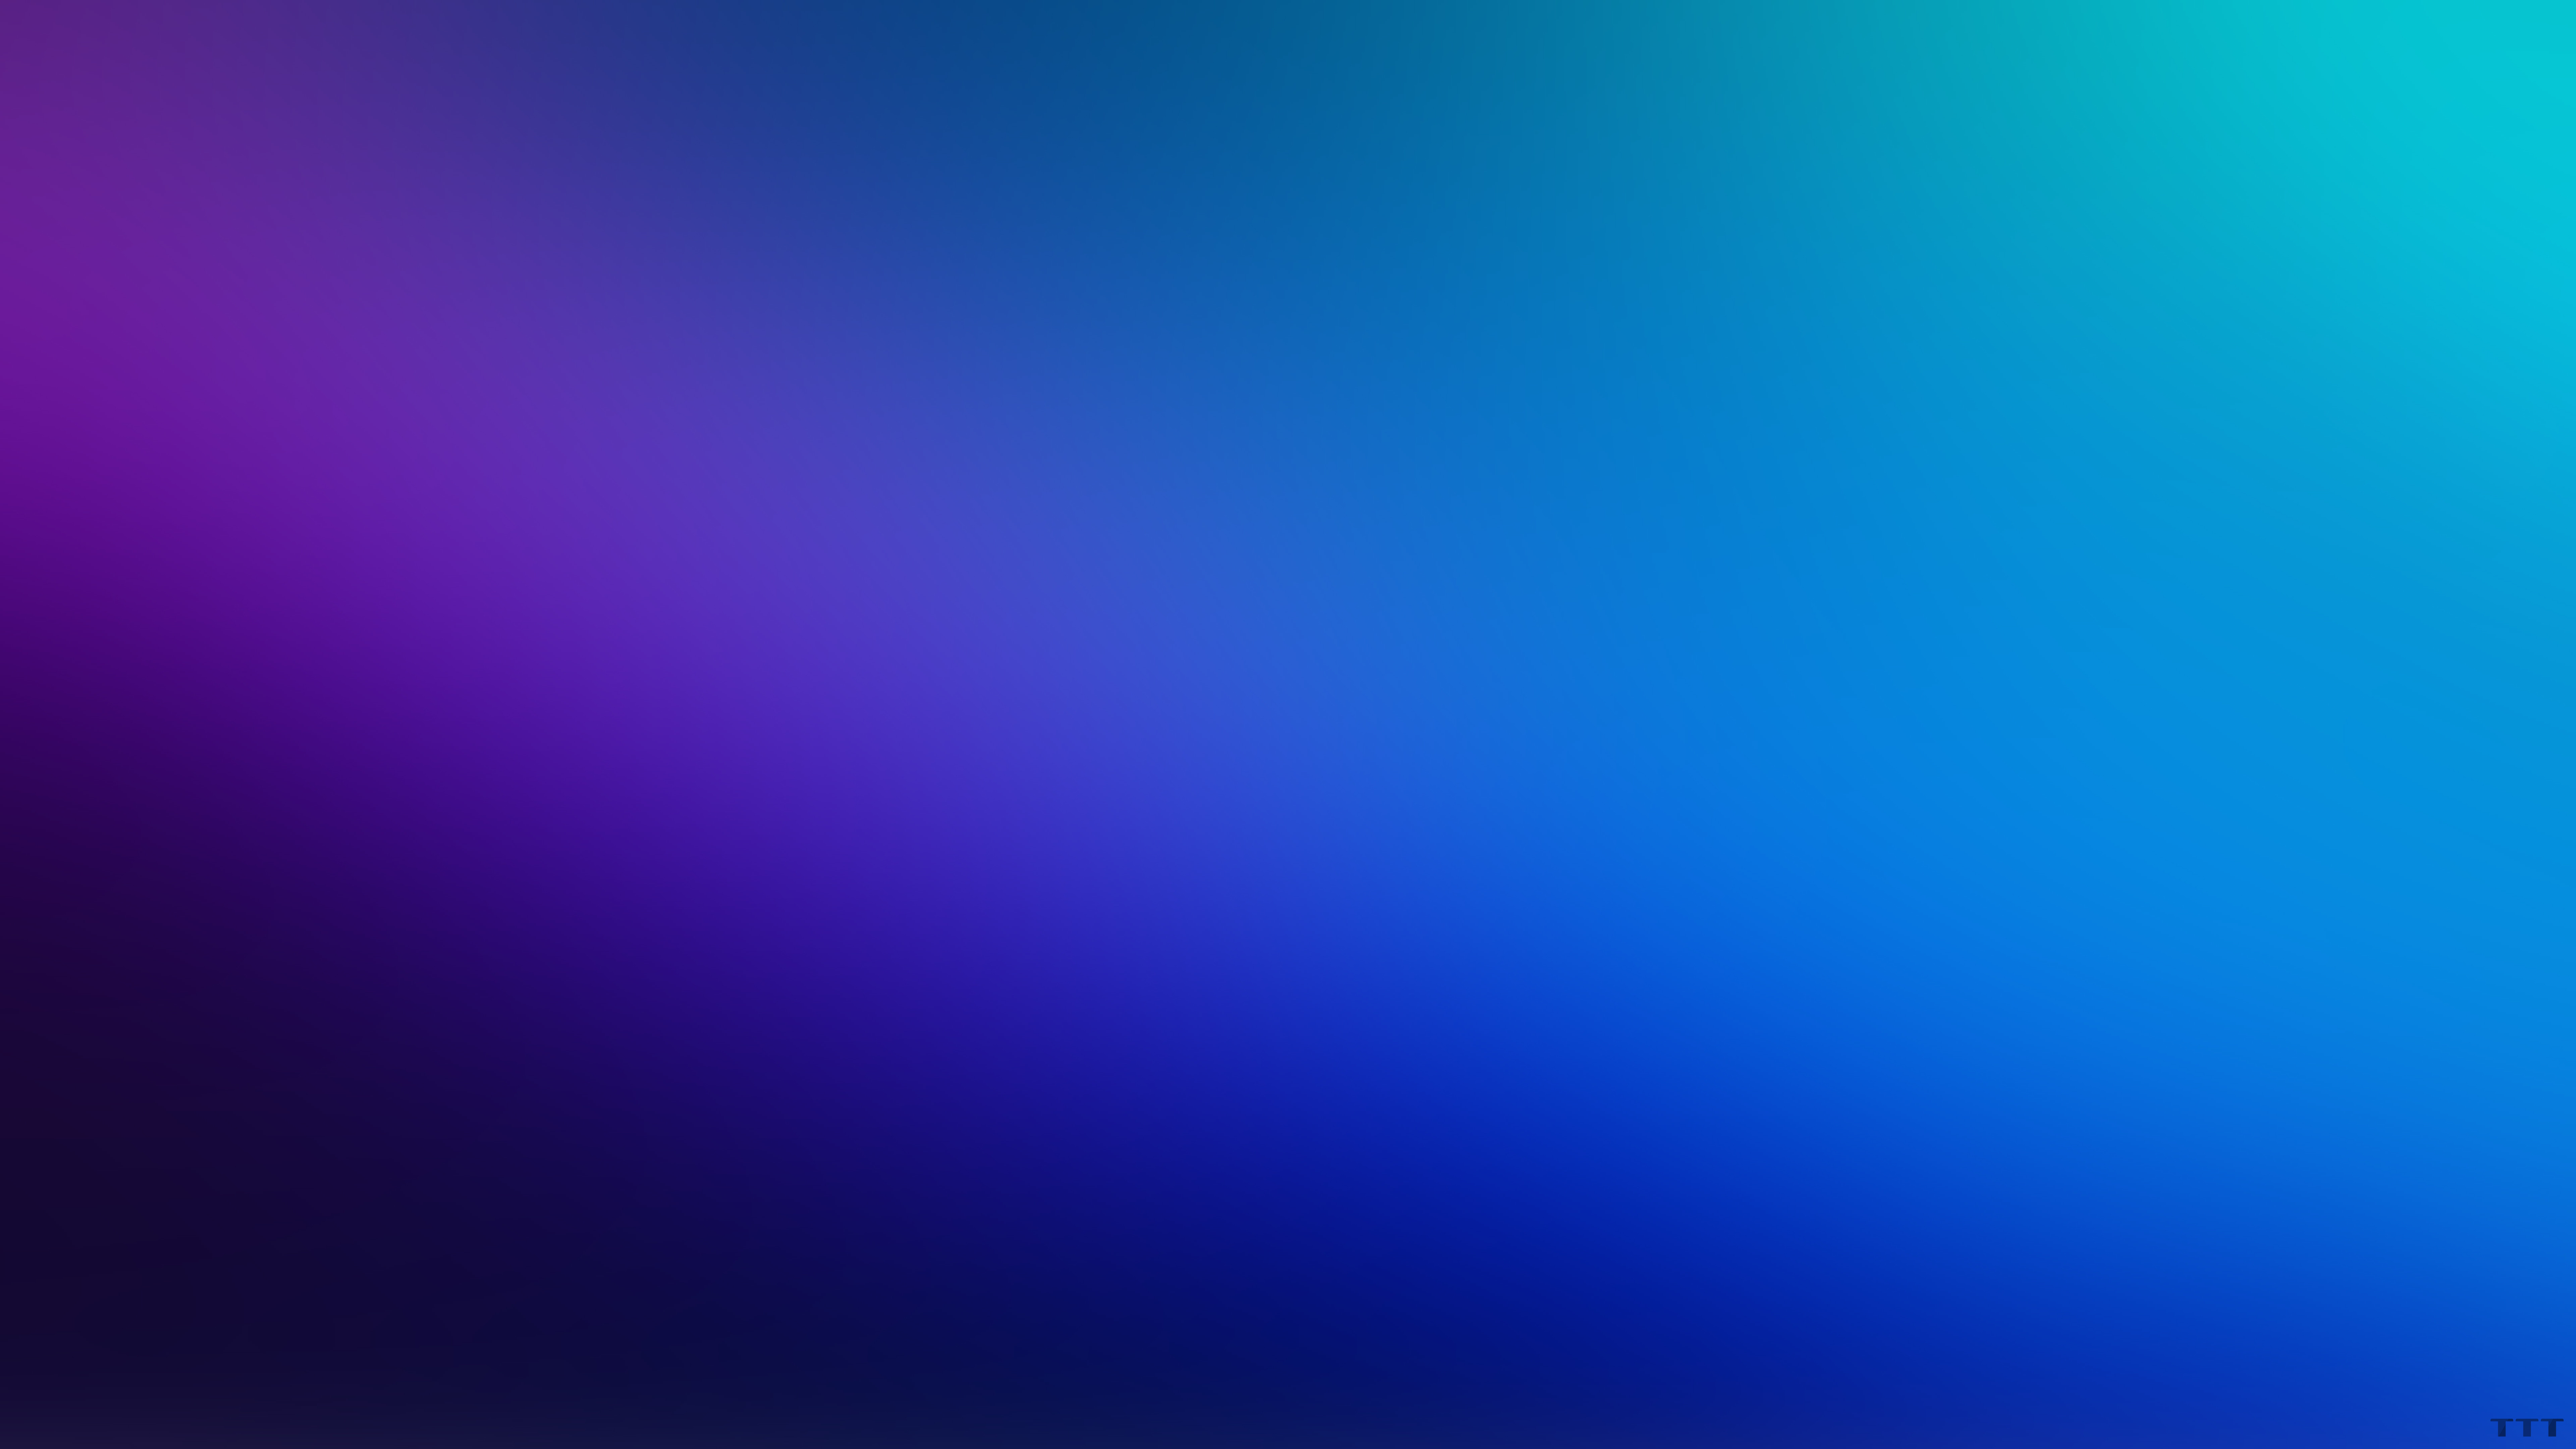 Blue And Purple Gradient Background - 7680x4320 Wallpaper 